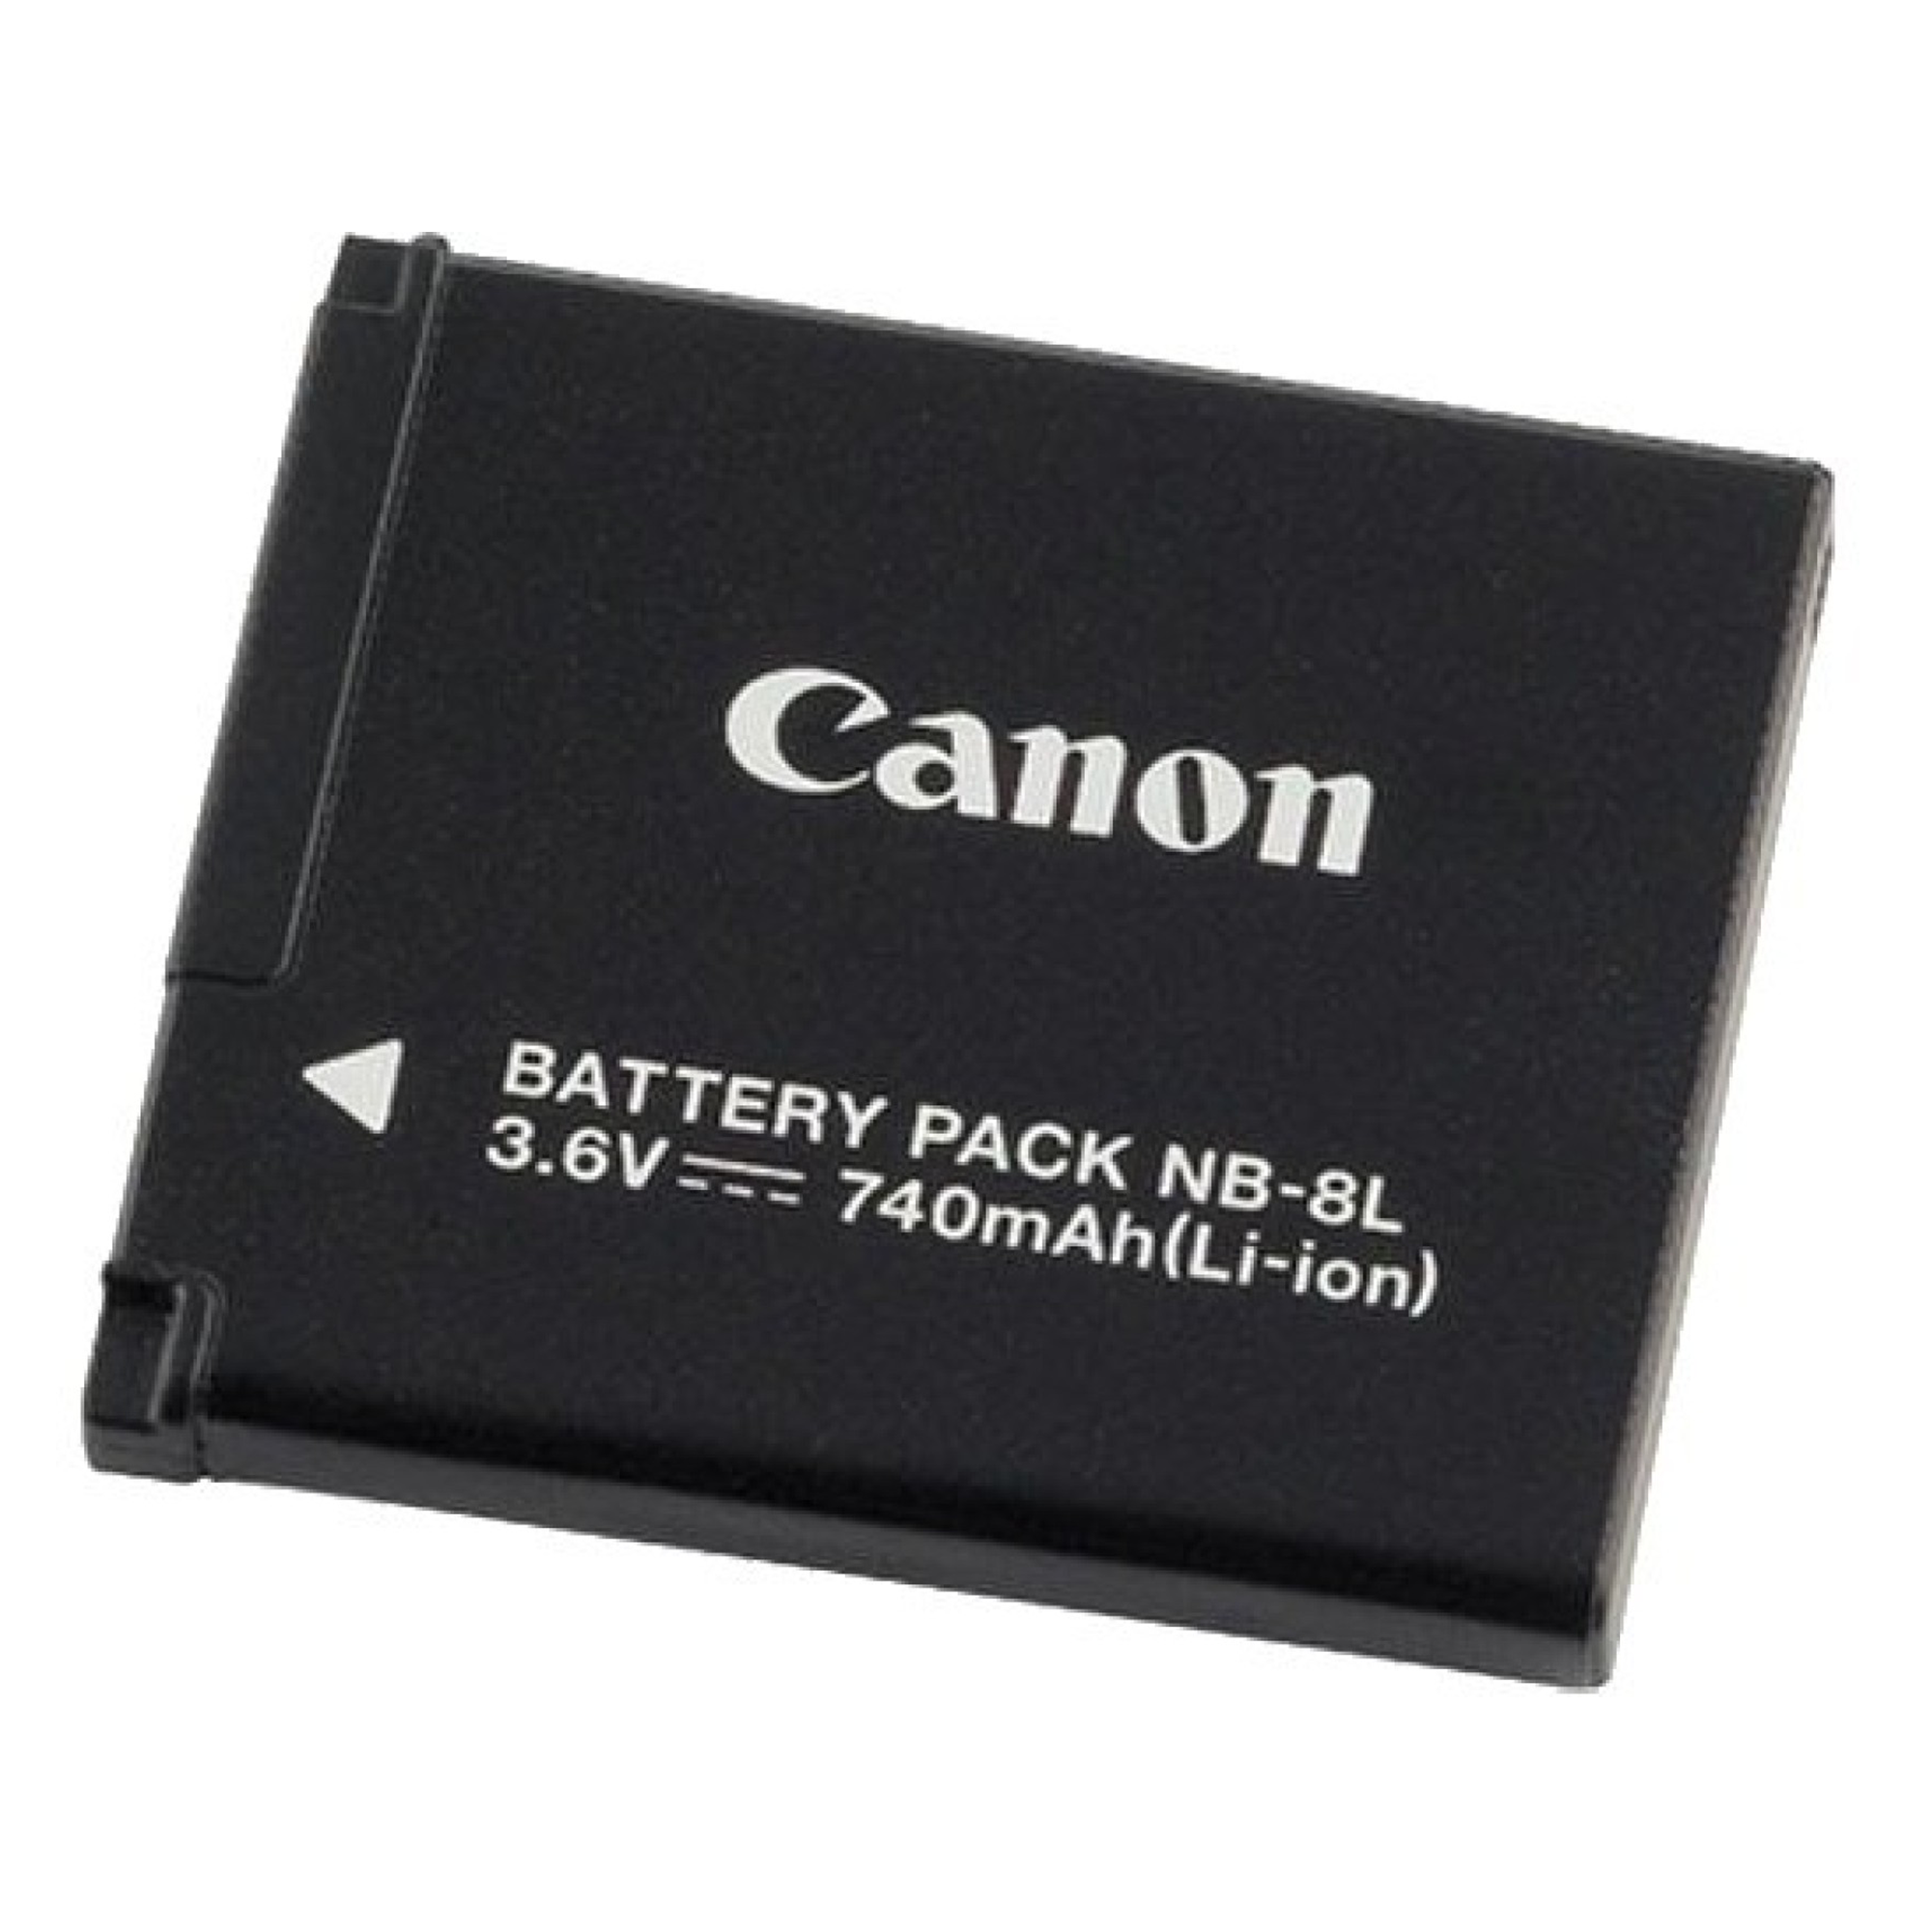 CANON BATTERY PACK/NB-8L